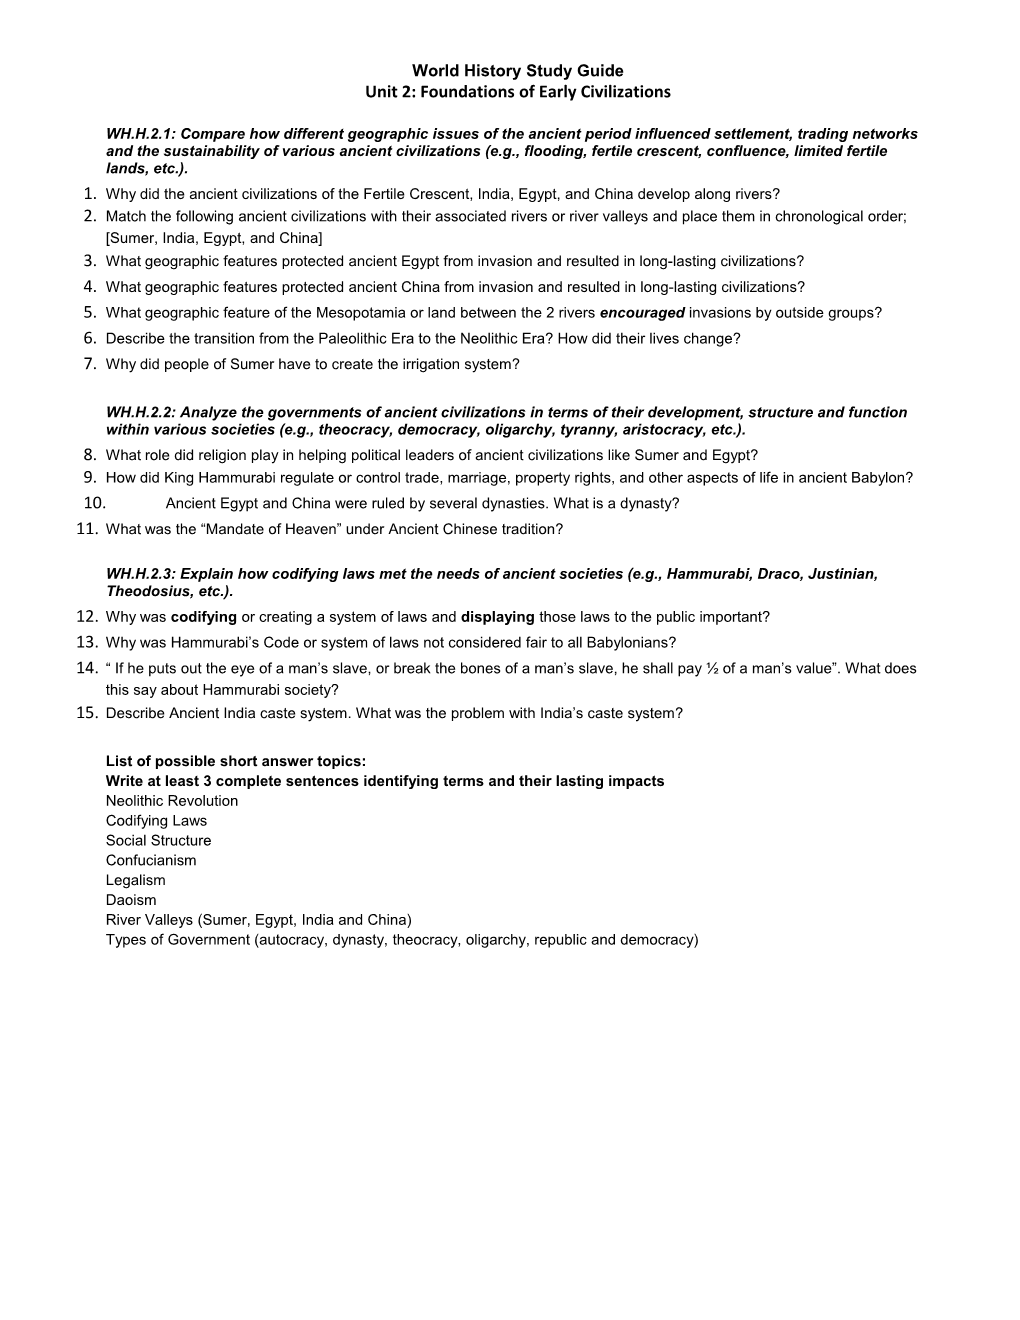 WH Unit 2A Foundations of Civilizations Study Guide 1